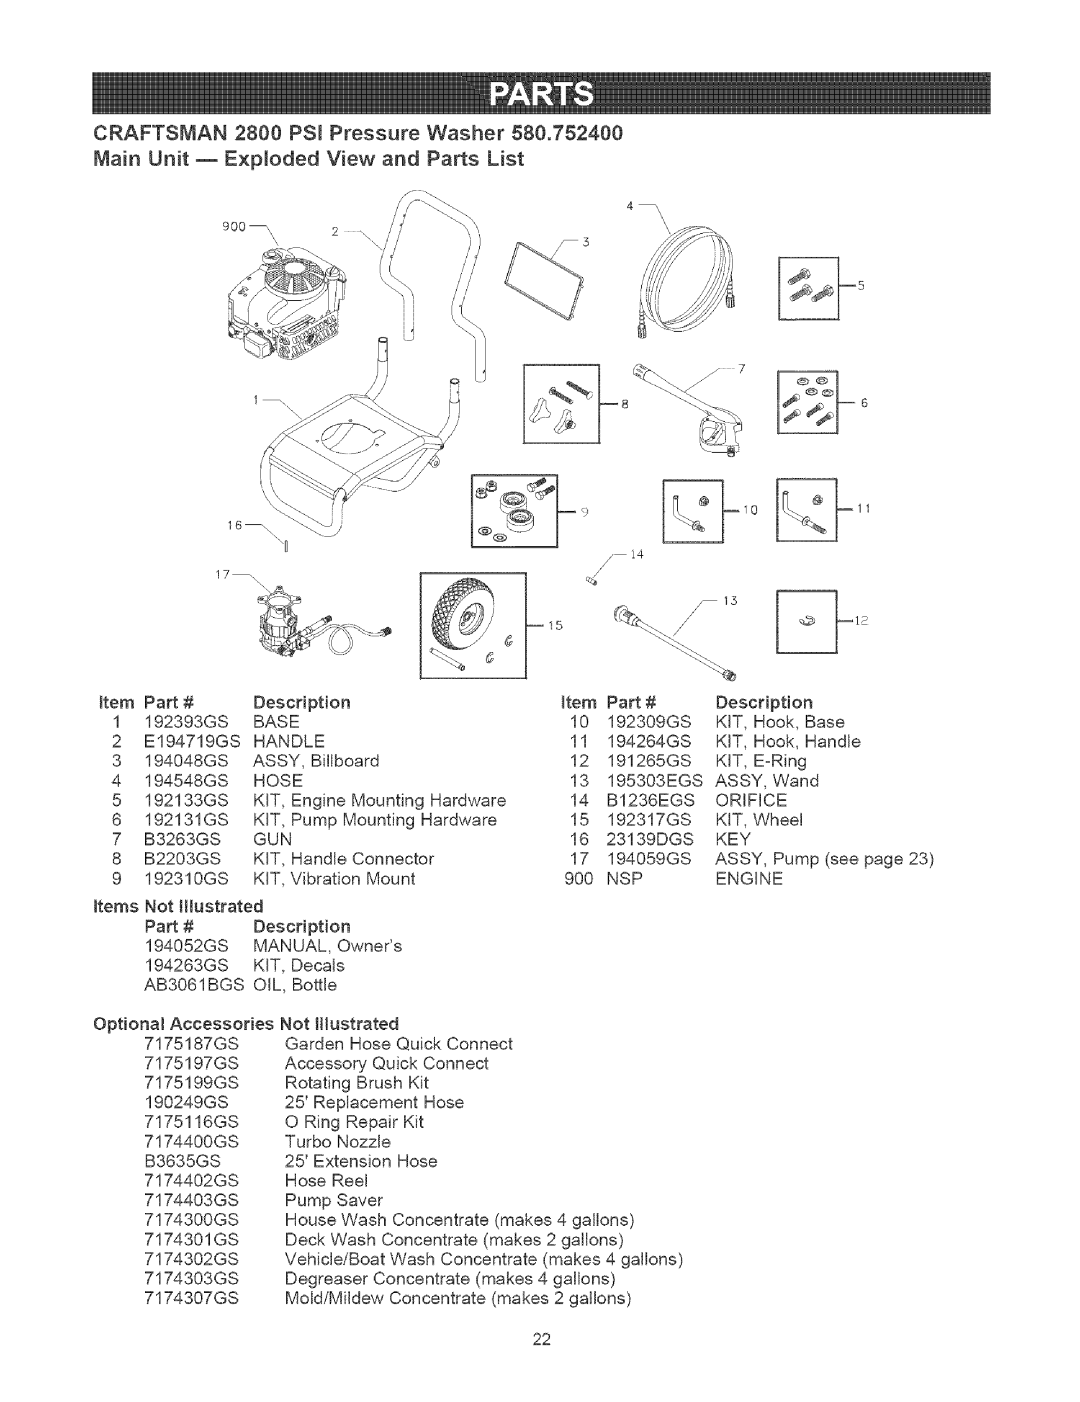 Craftsman 580.7524 owner manual CRAFTSMAN 2800 PSE Pressure Washer, Main Unit m Exploded View and Parts List 